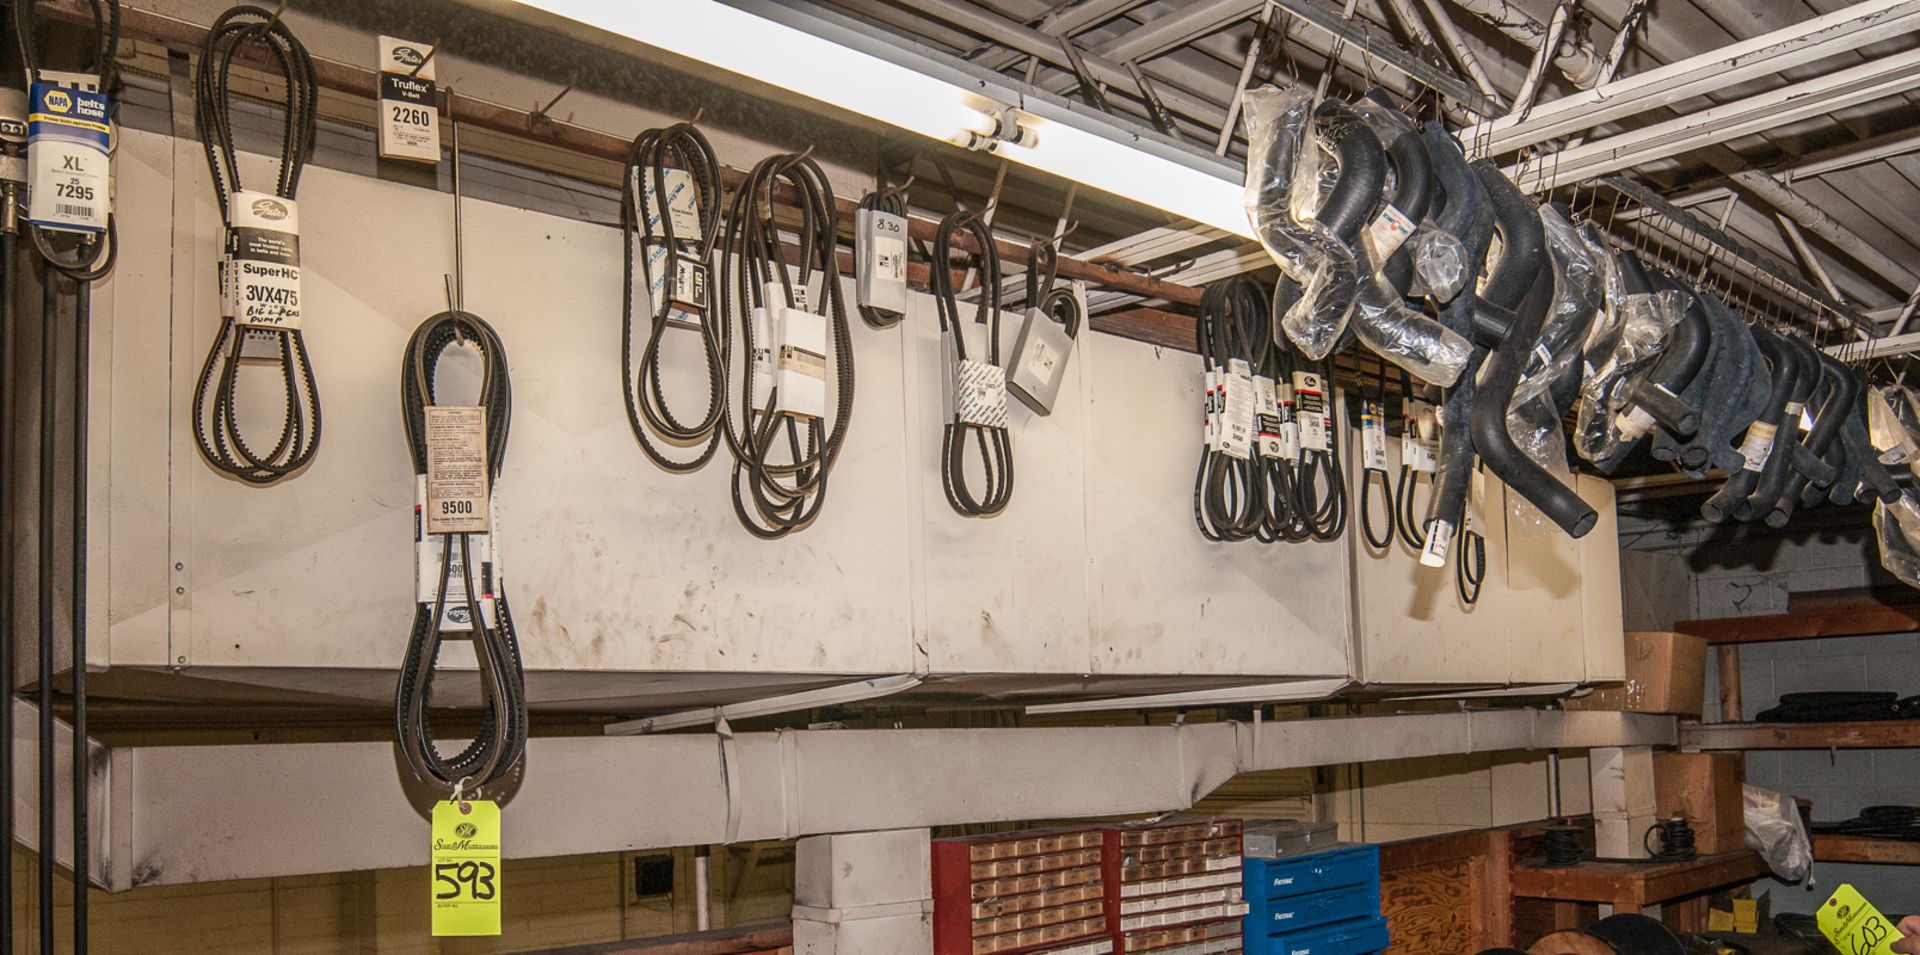 Belts and hoses hanging from ceiling